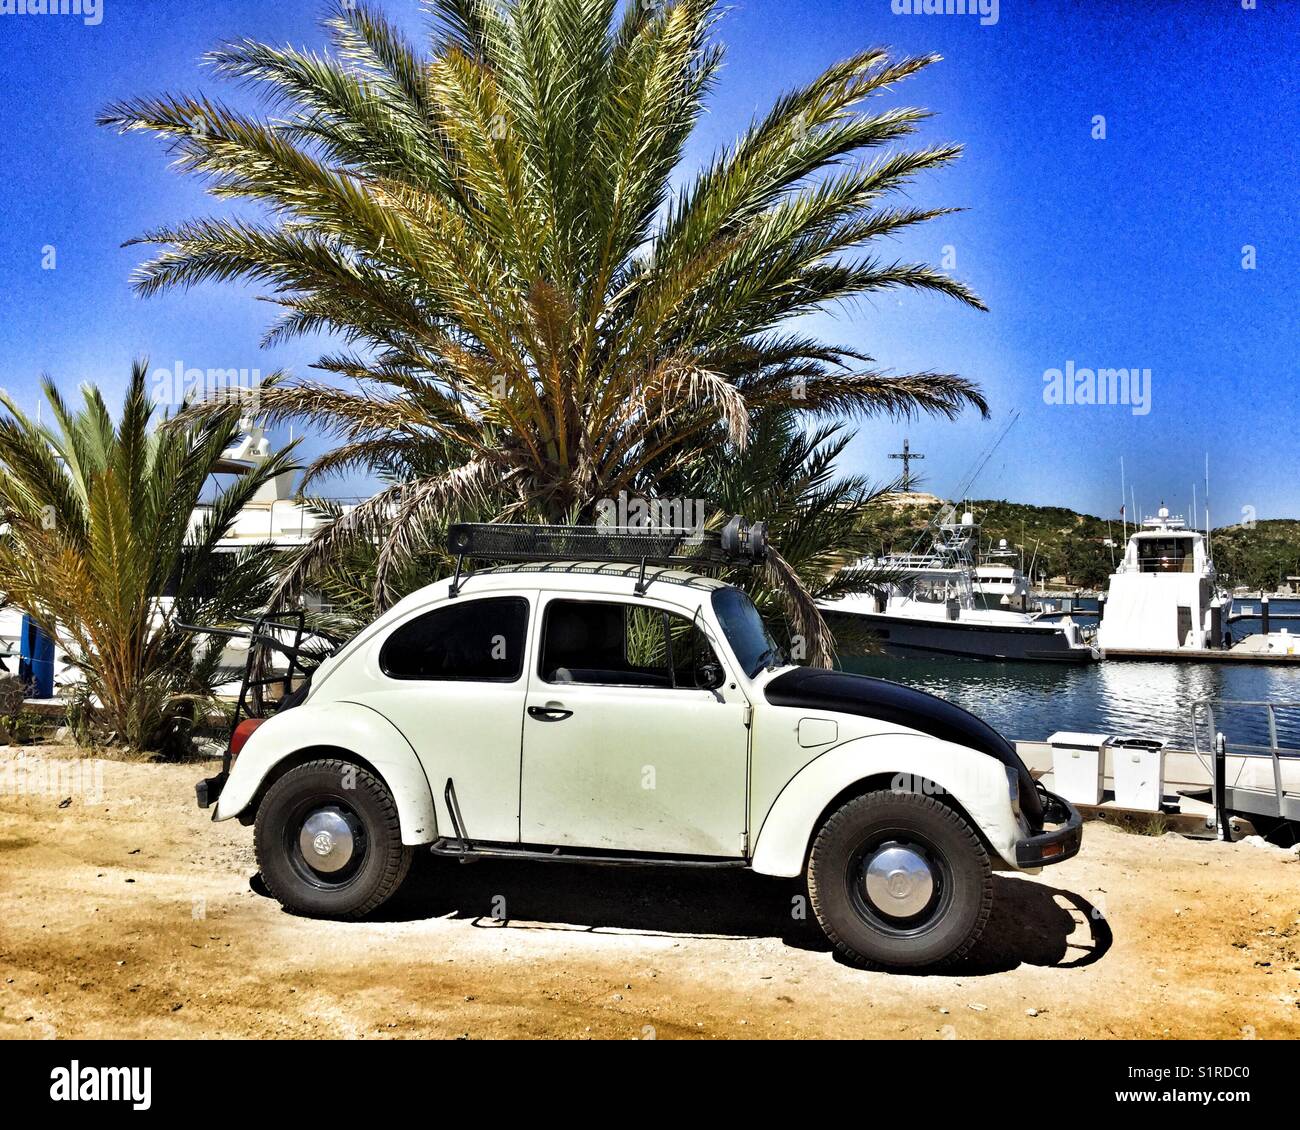 An old model VW parked next to a palm tree at the marina in Puerto Los Cabos, Mexico. Stock Photo